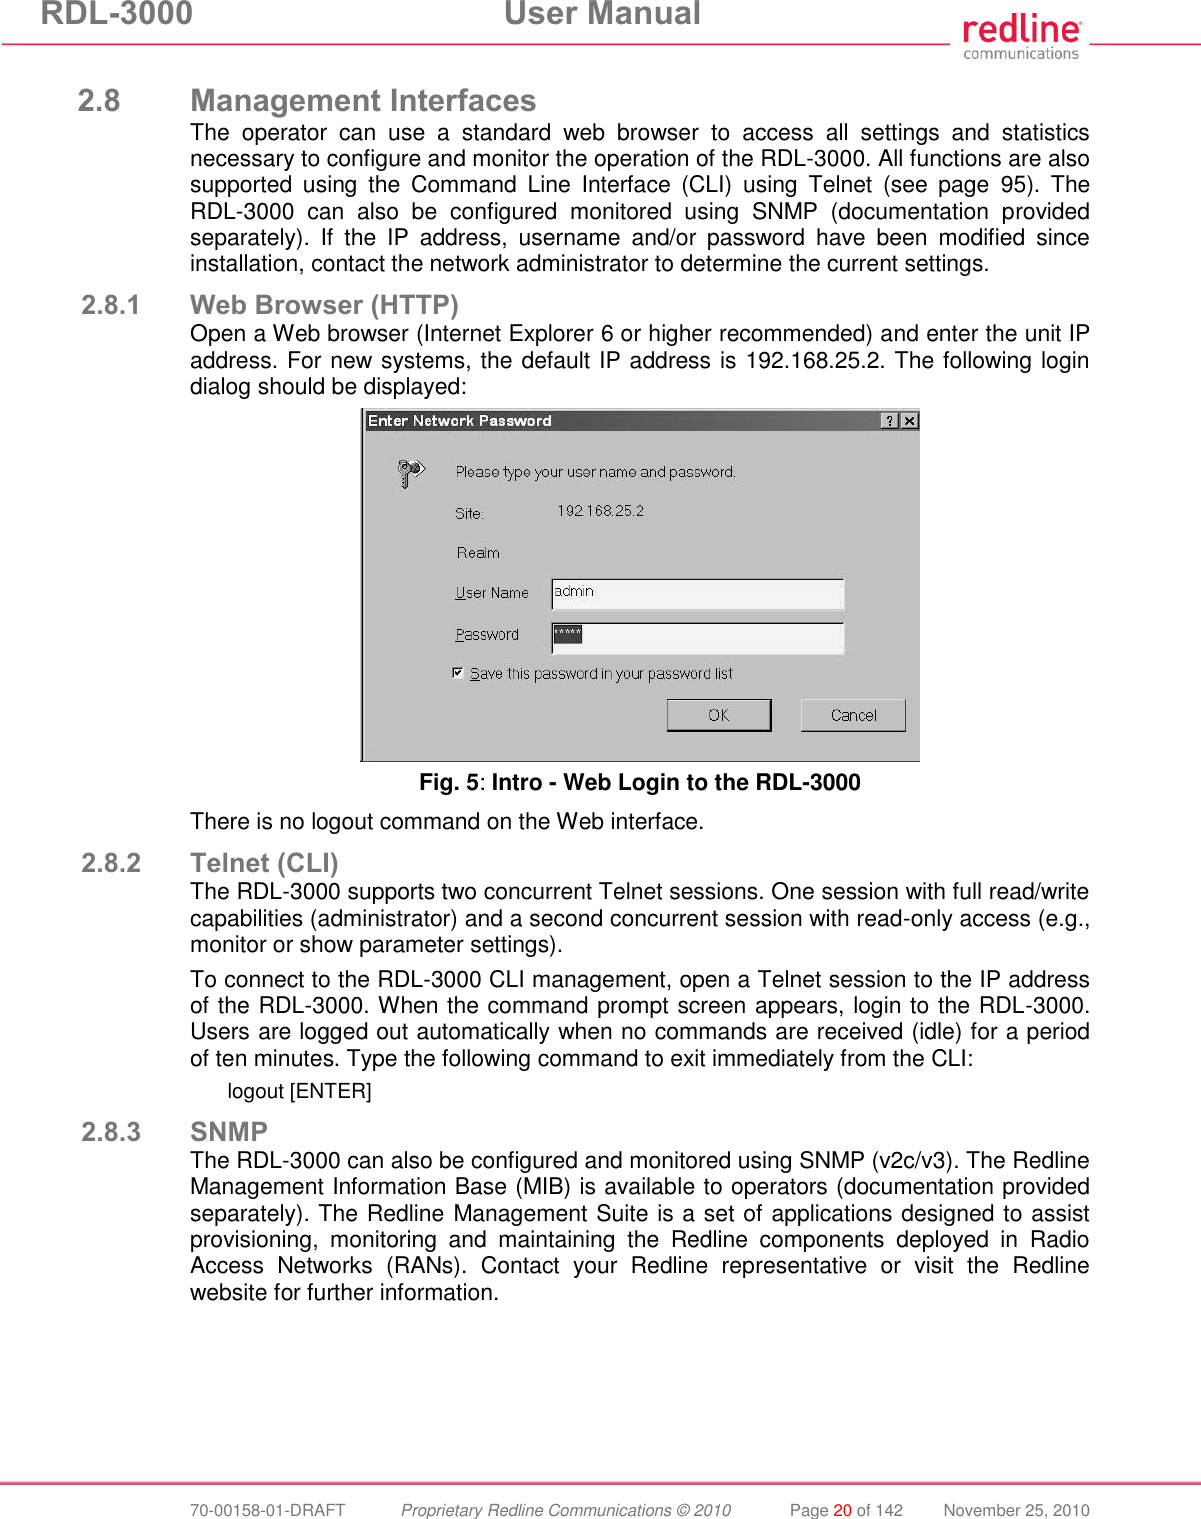 RDL-3000  User Manual  70-00158-01-DRAFT  Proprietary Redline Communications © 2010  Page 20 of 142  November 25, 2010  2.8 Management Interfaces The  operator  can  use  a  standard  web  browser  to  access  all  settings  and  statistics necessary to configure and monitor the operation of the RDL-3000. All functions are also supported  using  the  Command  Line  Interface  (CLI)  using  Telnet  (see  page  95).  The RDL-3000  can  also  be  configured  monitored  using  SNMP  (documentation  provided separately).  If  the  IP  address,  username  and/or  password  have  been  modified  since installation, contact the network administrator to determine the current settings. 2.8.1 Web Browser (HTTP) Open a Web browser (Internet Explorer 6 or higher recommended) and enter the unit IP address. For new systems, the default IP address is 192.168.25.2. The following login dialog should be displayed:  Fig. 5: Intro - Web Login to the RDL-3000 There is no logout command on the Web interface. 2.8.2 Telnet (CLI) The RDL-3000 supports two concurrent Telnet sessions. One session with full read/write capabilities (administrator) and a second concurrent session with read-only access (e.g., monitor or show parameter settings). To connect to the RDL-3000 CLI management, open a Telnet session to the IP address of the RDL-3000. When the command prompt screen appears, login to the RDL-3000. Users are logged out automatically when no commands are received (idle) for a period of ten minutes. Type the following command to exit immediately from the CLI: logout [ENTER] 2.8.3 SNMP The RDL-3000 can also be configured and monitored using SNMP (v2c/v3). The Redline Management Information Base (MIB) is available to operators (documentation provided separately). The Redline Management Suite is a set of applications designed to assist provisioning,  monitoring  and  maintaining  the  Redline  components  deployed  in  Radio Access  Networks  (RANs).  Contact  your  Redline  representative  or  visit  the  Redline website for further information. 